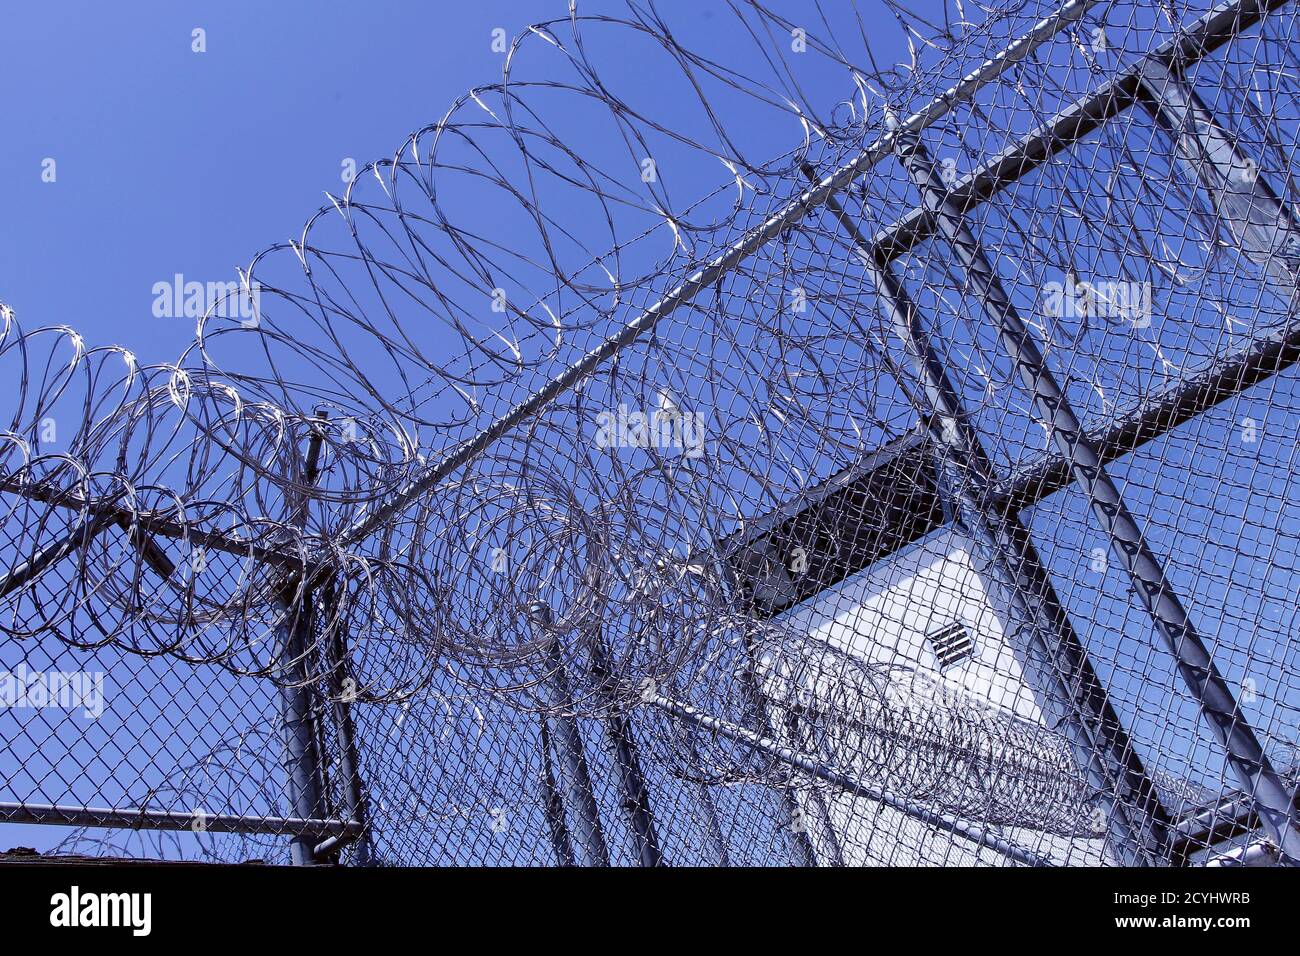 The guard tower is seen behind razor wire at the California Institution for Men state prison in Chino, California, June 3, 2011. The Supreme Court has ordered California to release more than 30,000 inmates over the next two years or take other steps to ease overcrowding in its prisons to prevent 'needless suffering and death.' California's 33 adult prisons were designed to hold about 80,000 inmates and now have about 145,000. The United States has more than 2 million people in state and local prisons. It has long had the highest incarceration rate in the world. REUTERS/Lucy Nicholson (UNITED S Stock Photo